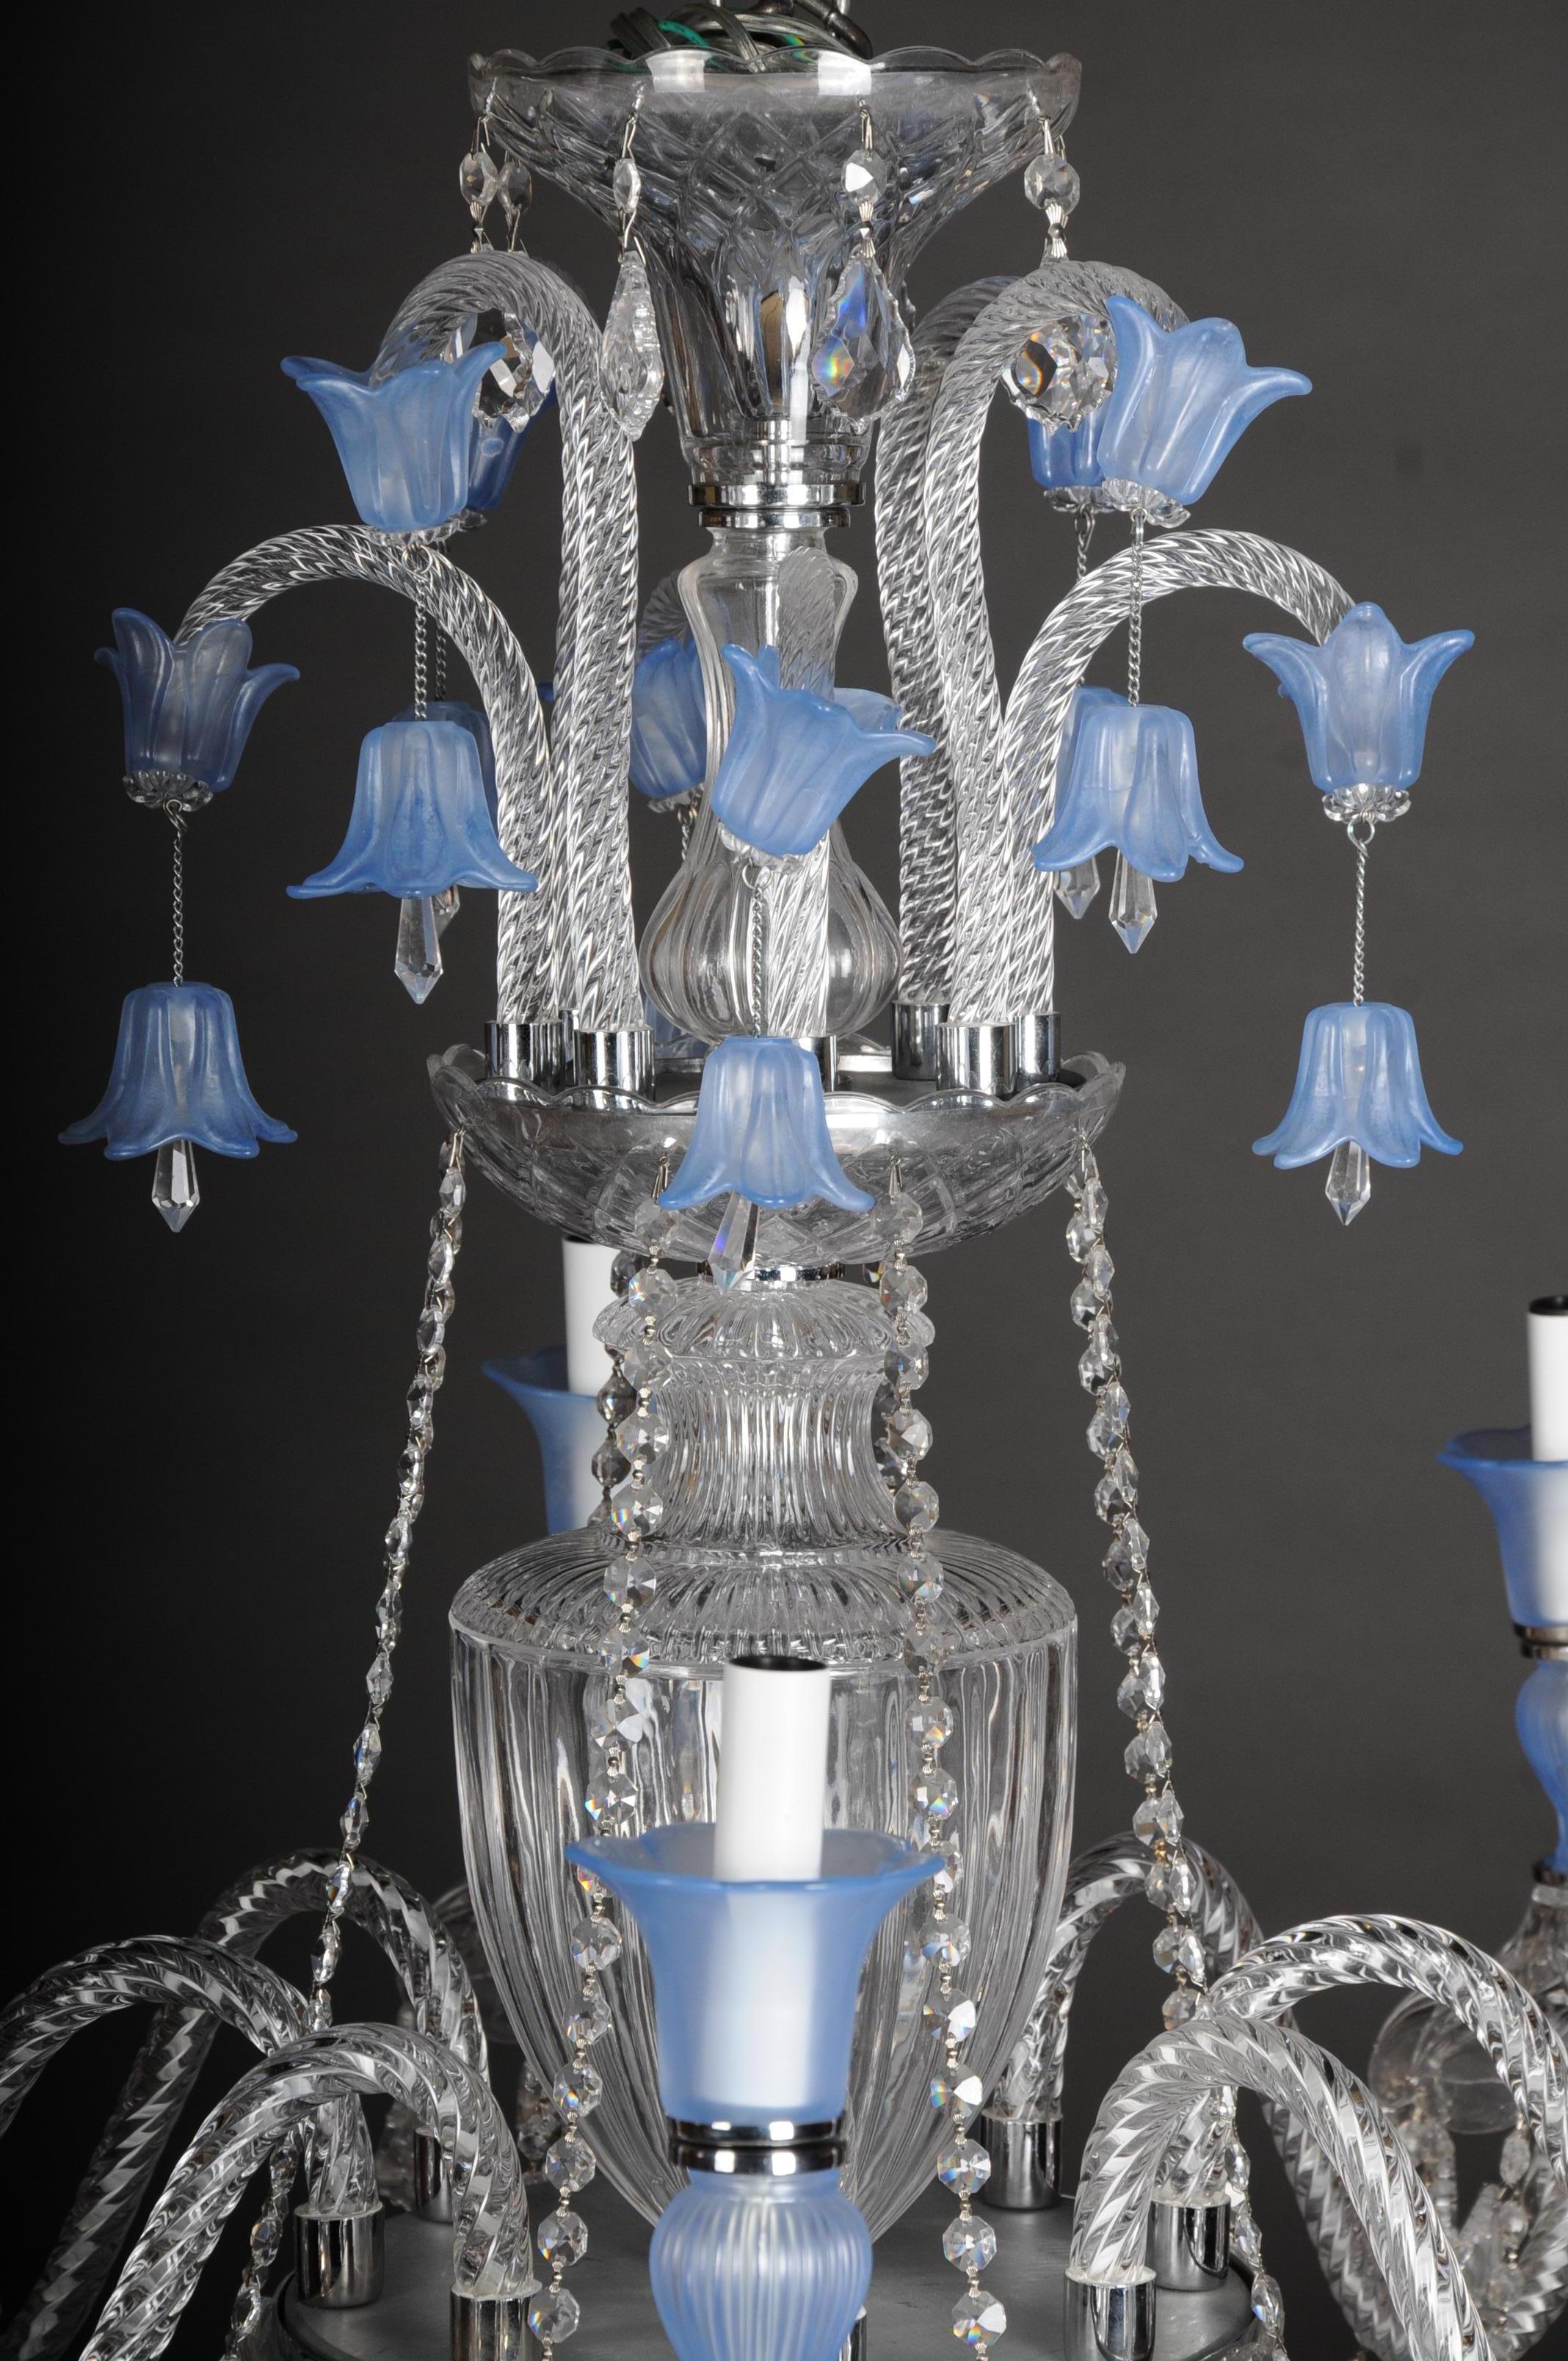 High quality large crystal chandelier, probably Murano

Modern high quality chandelier probably Murano. 8 arms. In the center, multi-articulated baluster-shaped glass shaft with crowning. 8 external flames. The finely cut crystals, which contain